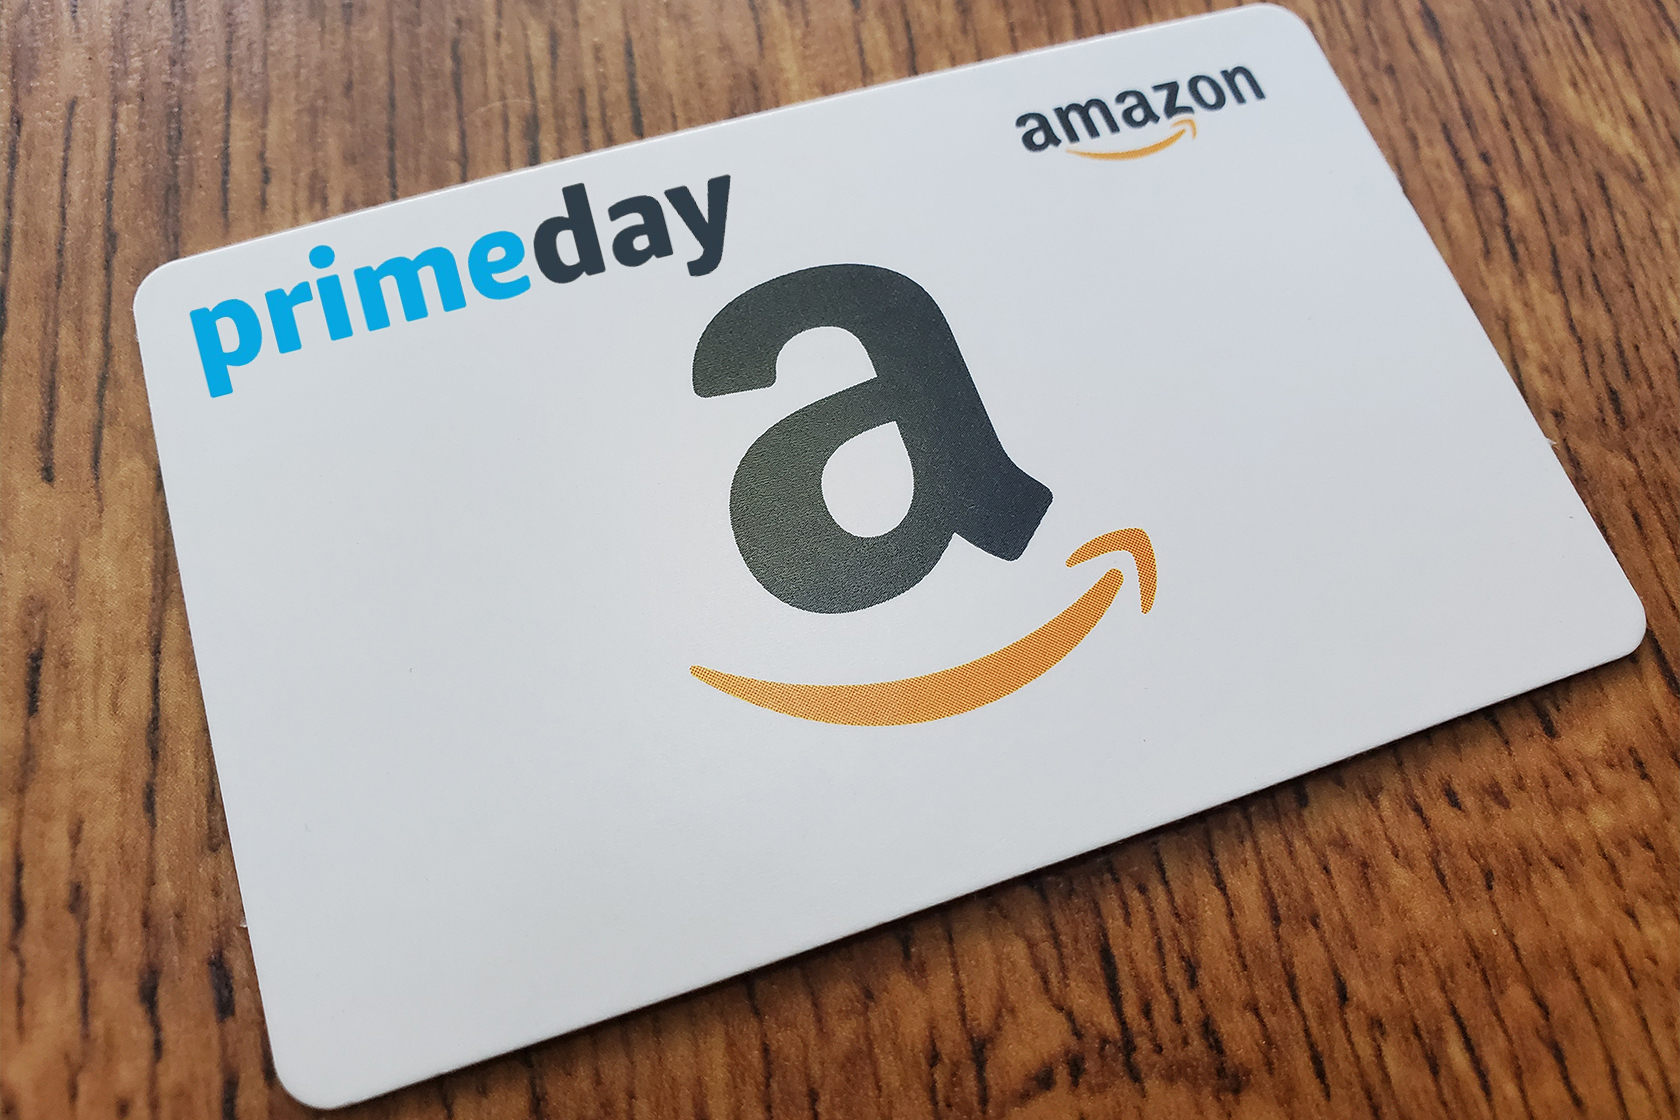 Amazon Prime Day gift card deal Buy a 50 gift card, get 5 free